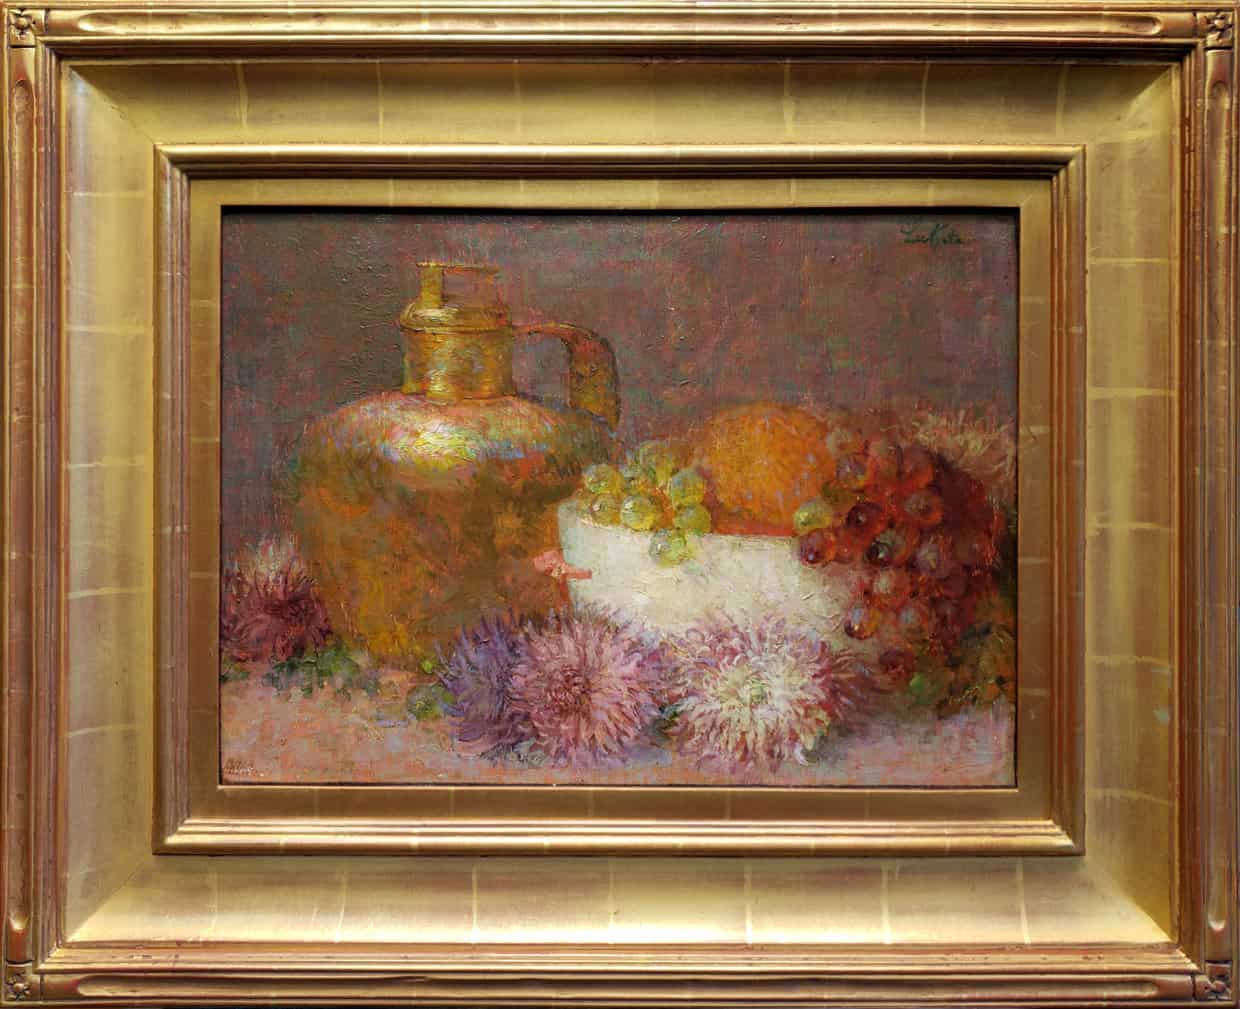 American Legacy Fine Arts presents "Rose and Gold" a painting by Theodore N. Lukits.